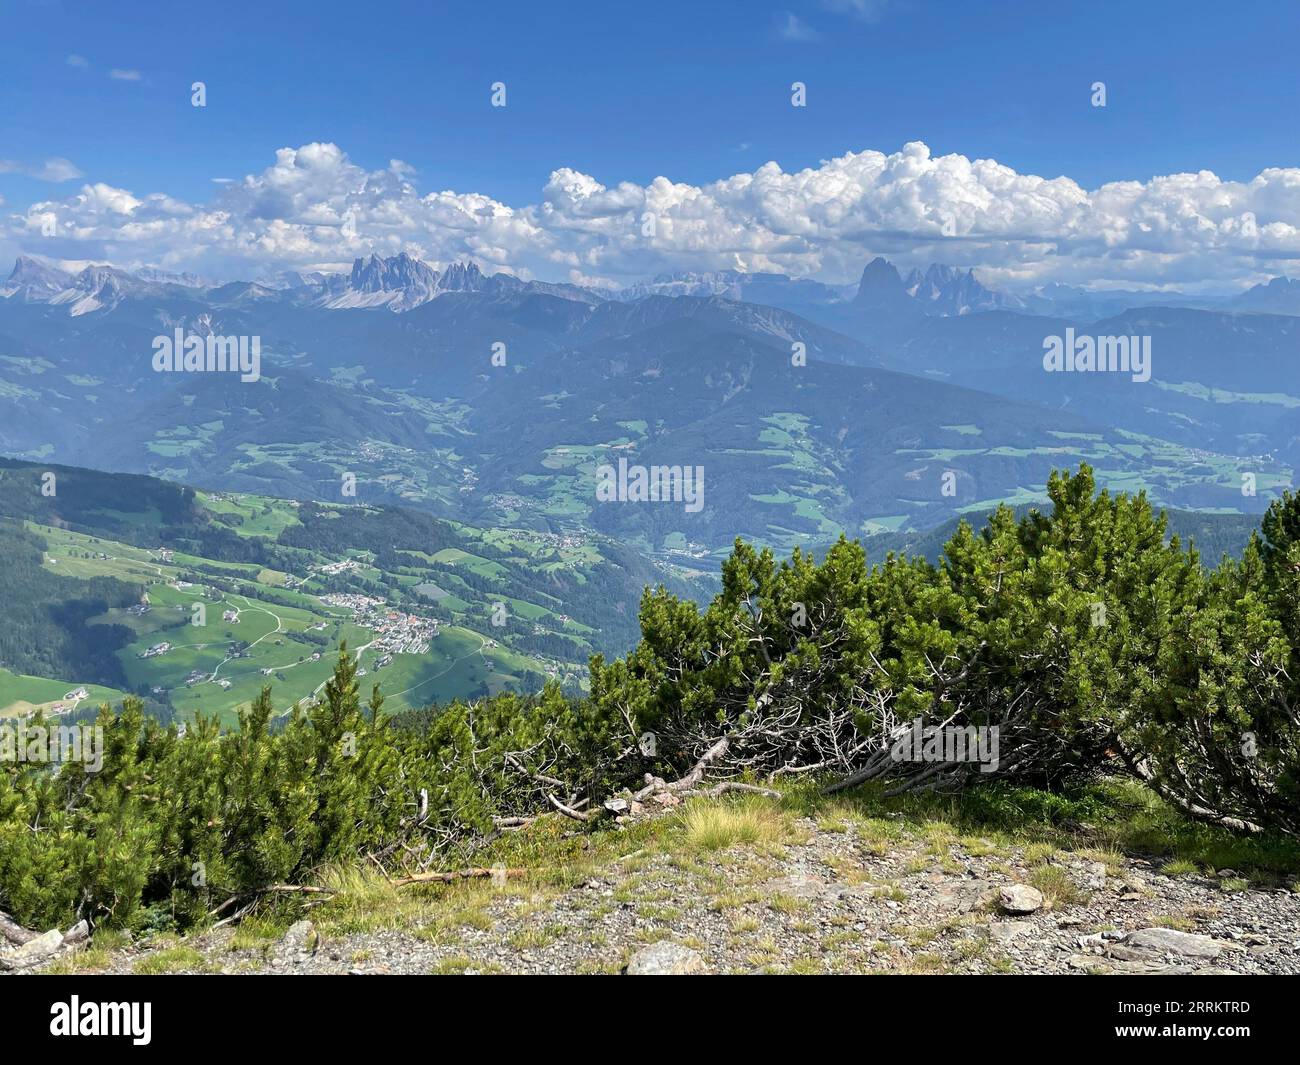 Valley view, hike to Latzfons Cross in South Tyrol, pilgrimage site, Sarntal Alps, 2300 m, viewpoint, Dolomites, Klausen, Latzfons, Wipptal, sun, mountains, clouds, nature, activity, Klausen, South Tyrol, Alto Adige, Italy Stock Photo